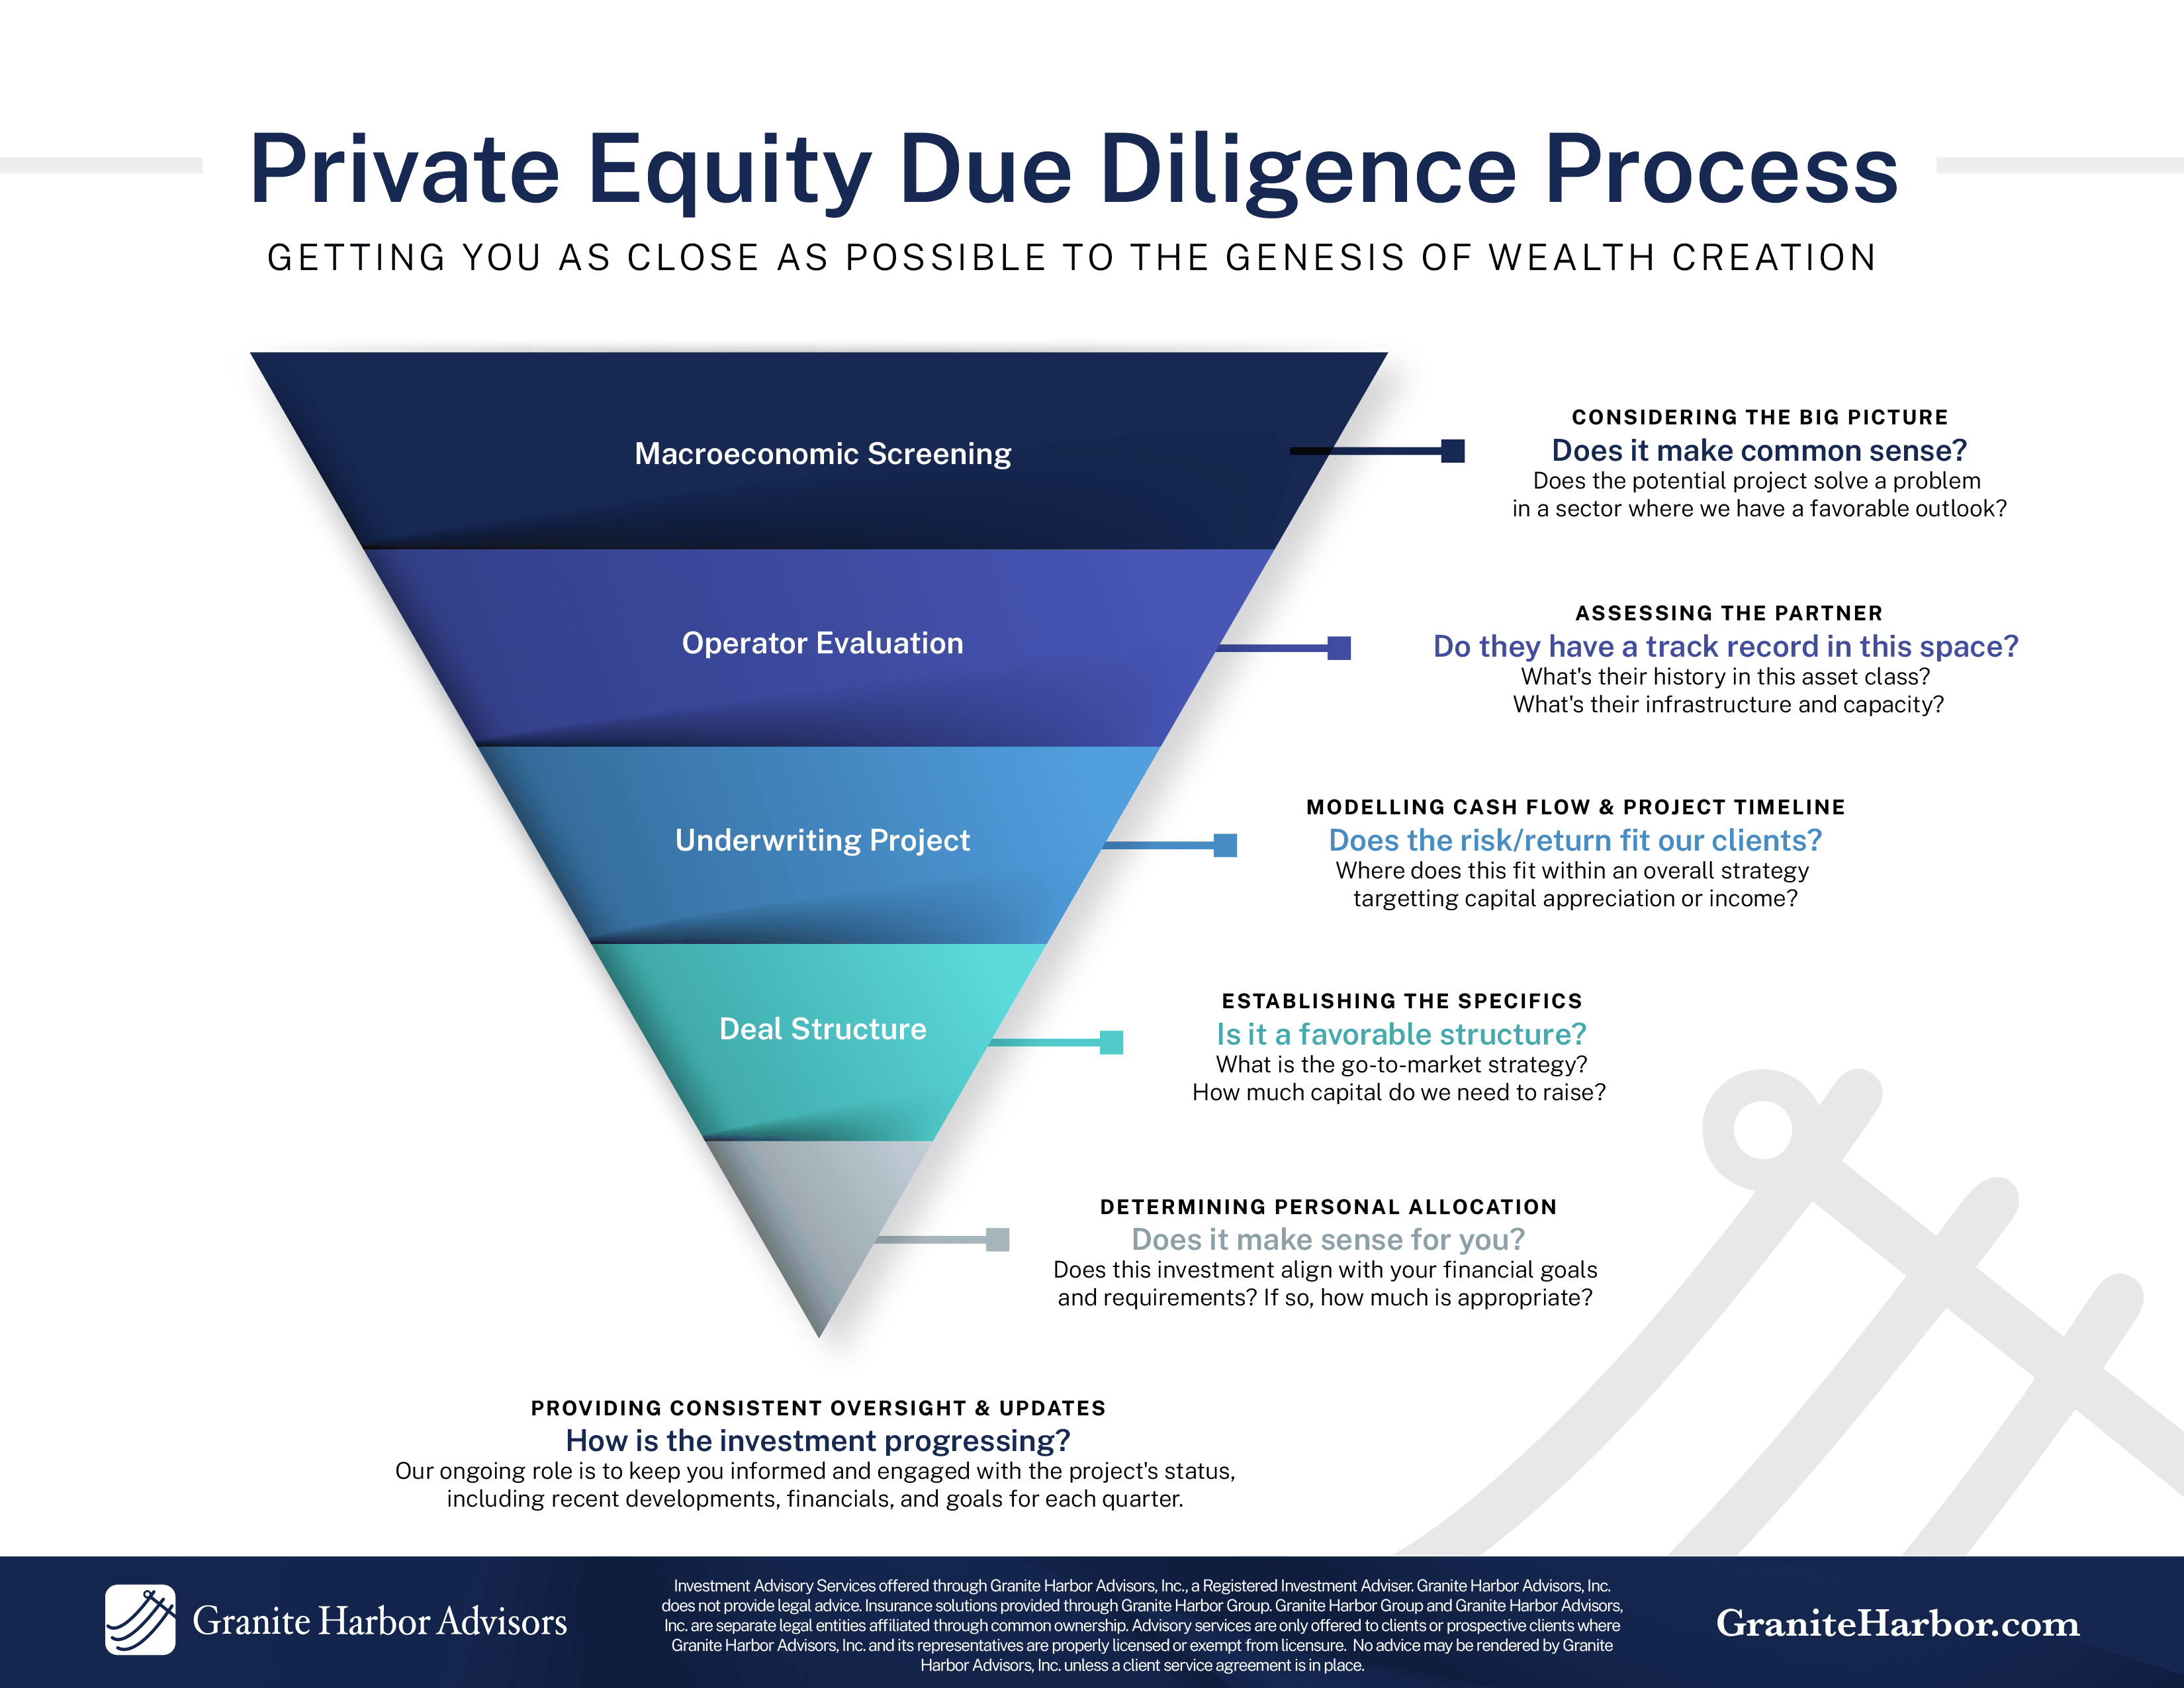 a-comprehensive-guide-to-the-private-equity-due-diligence-process